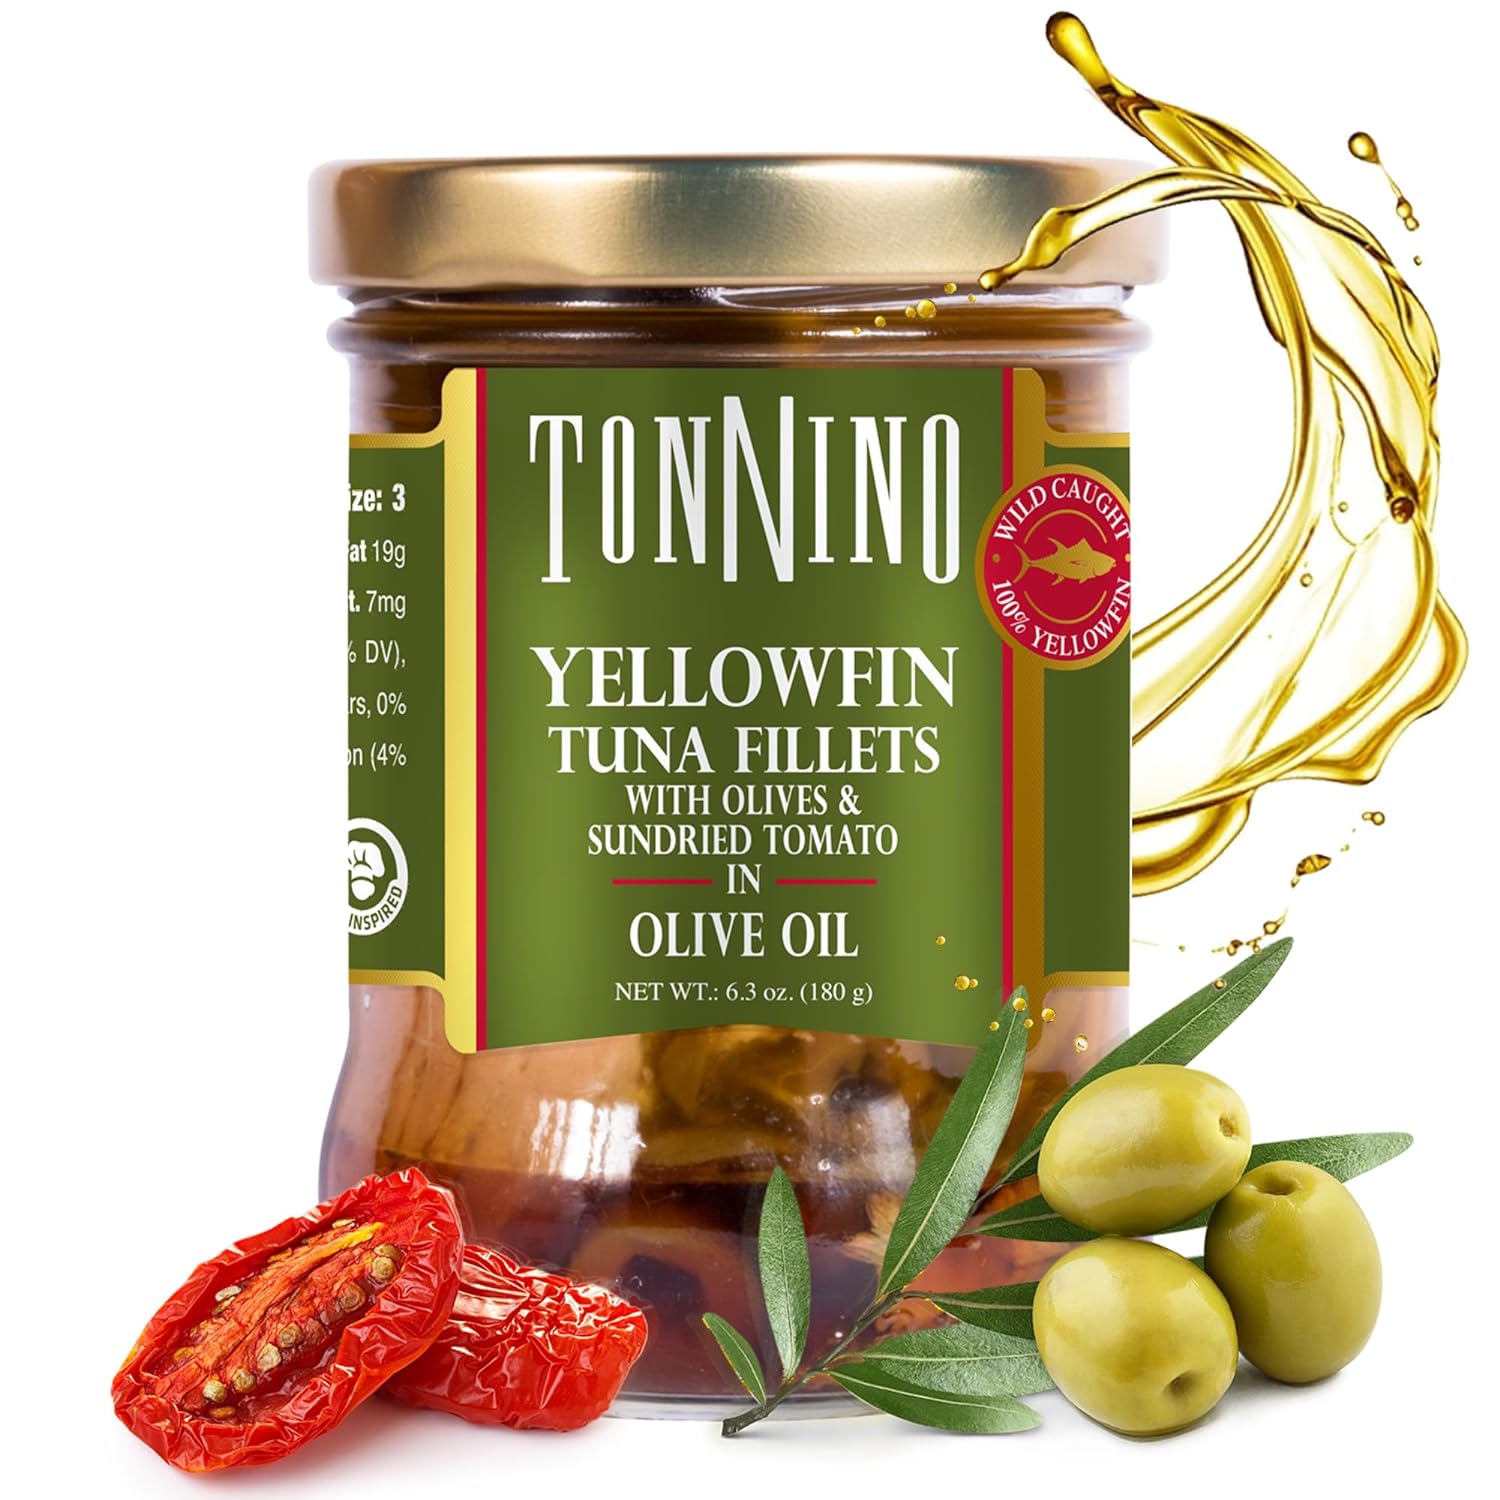 Tonnino Yellowfin Tuna in Olive Oil with Tomato & Olives 6.3 oz - Gourmet 6-Pack: Omega-3, High Protein, Gluten-Free, Ready-to-Eat Tuna Packets for Tuna Salad, Tuna Fish Alternative to Salmon